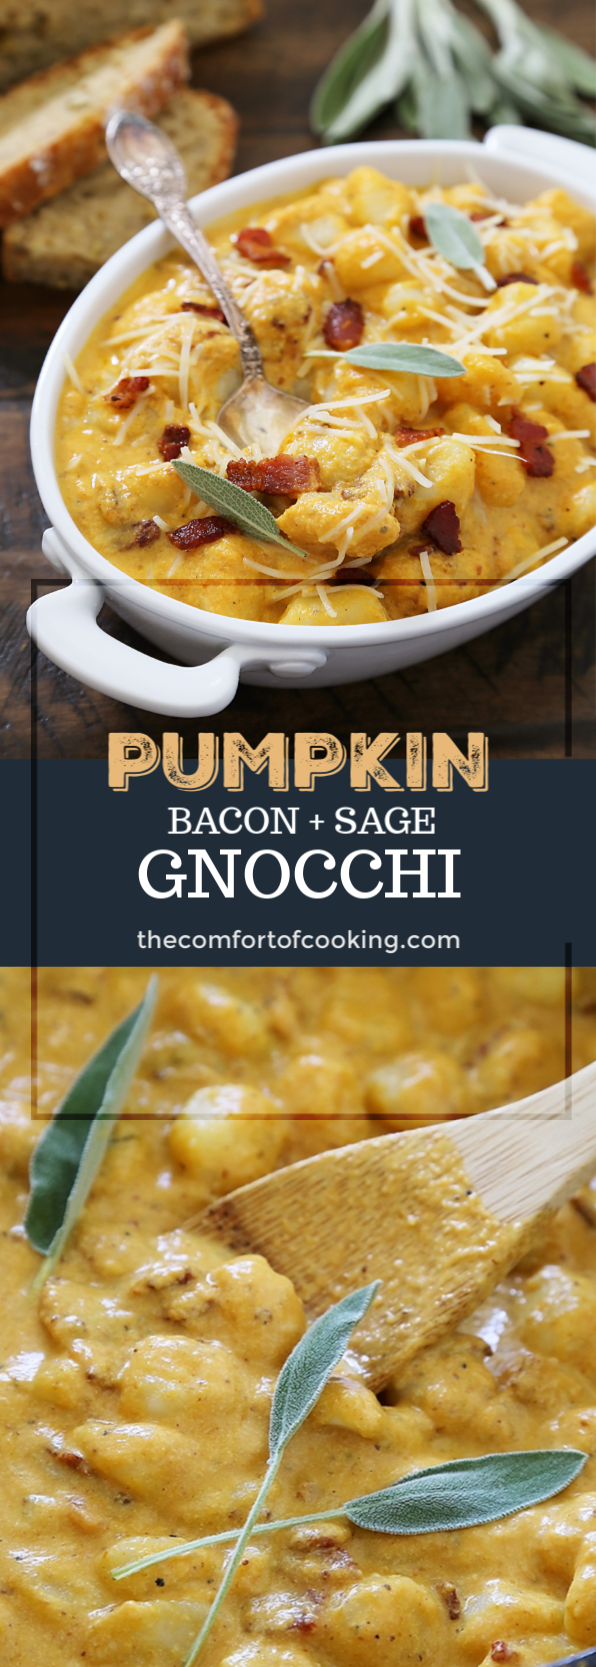 Gnocchi with Pumpkin, Bacon and Sage Sauce - Super creamy and delicious! Thecomfortofcooking.com